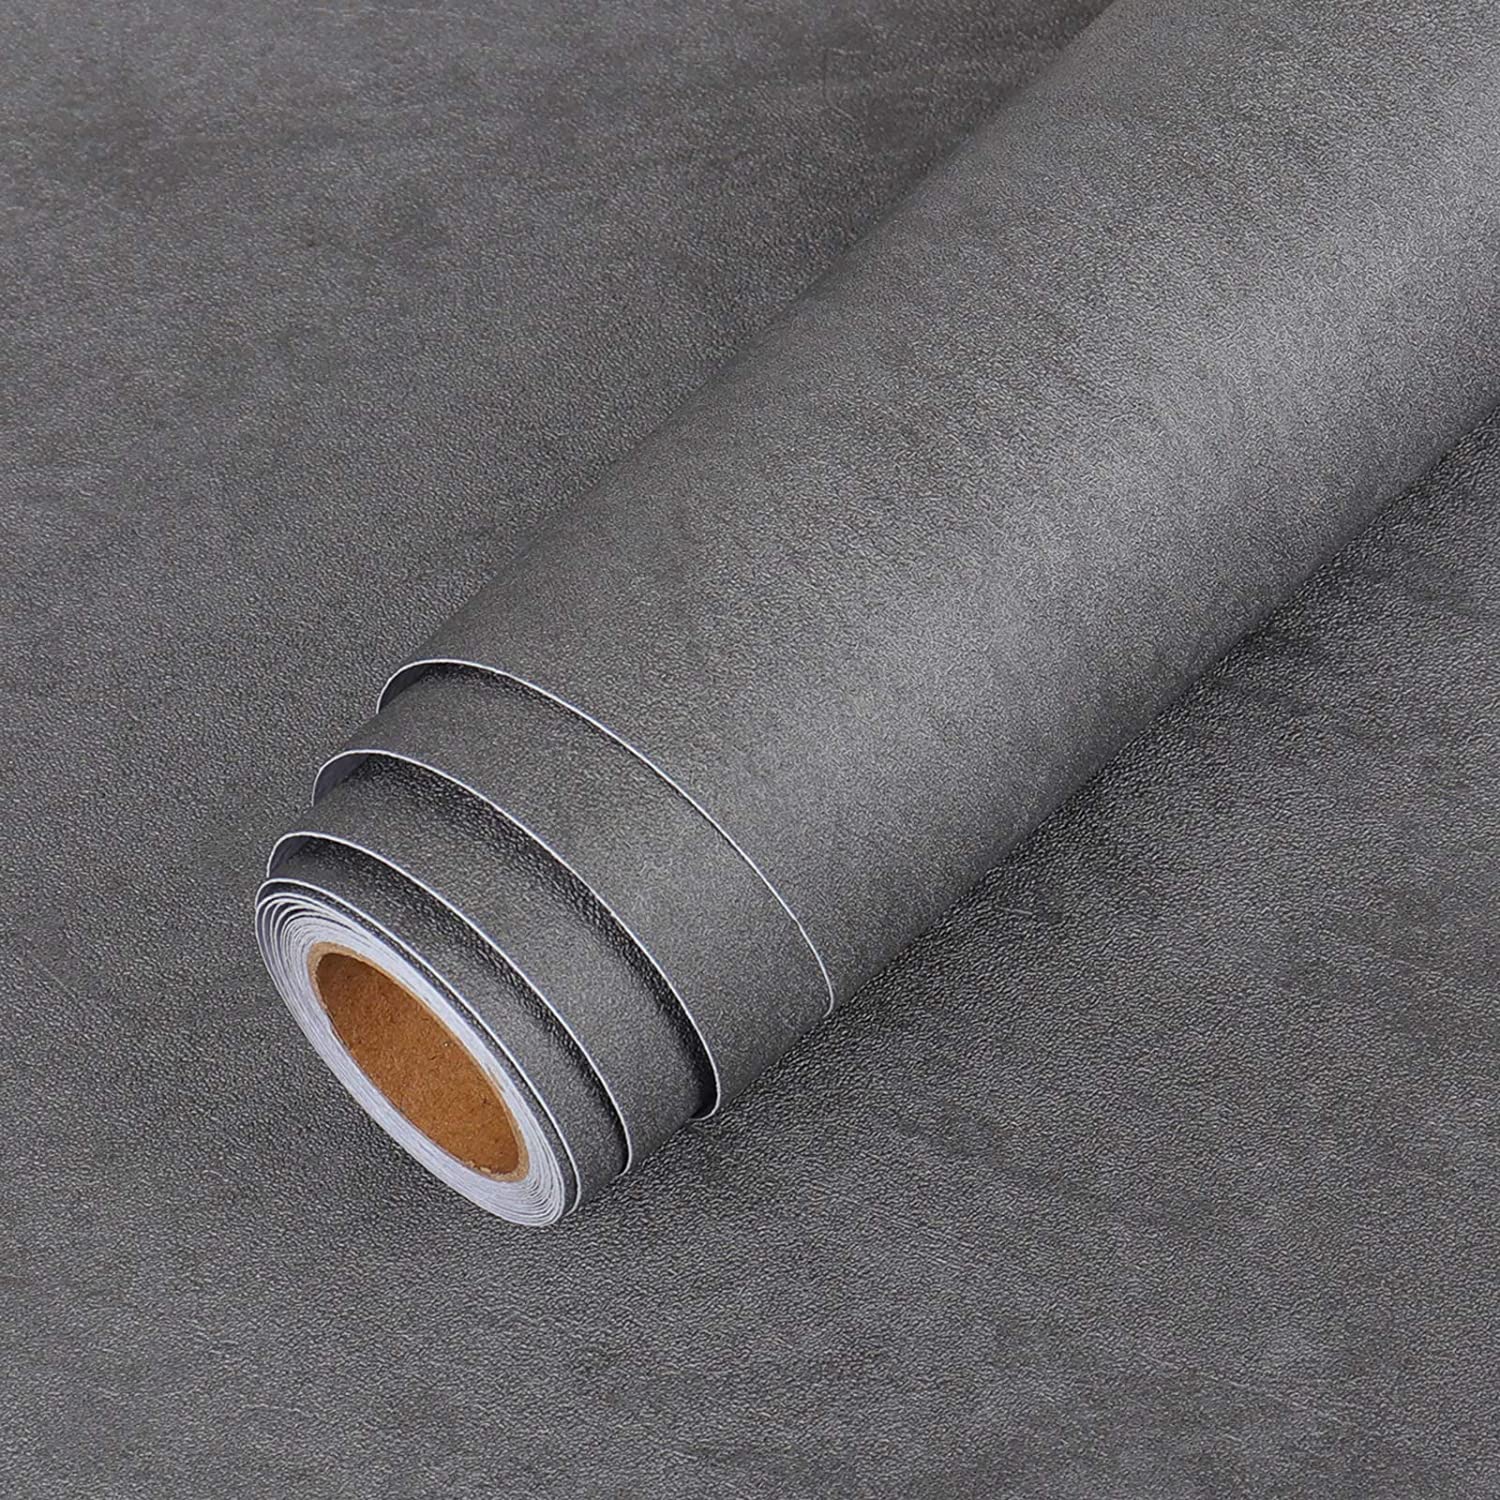 LACHEERY, LaCheery Extra Thick Matte Concrete Wallpaper Stick and Peel Wall Paper Roll Dark Grey Vinyl Countertops Vintage Industry Concrete Textured Cement Contact Paper for Bedroom Walls Furniture 15.8 x80